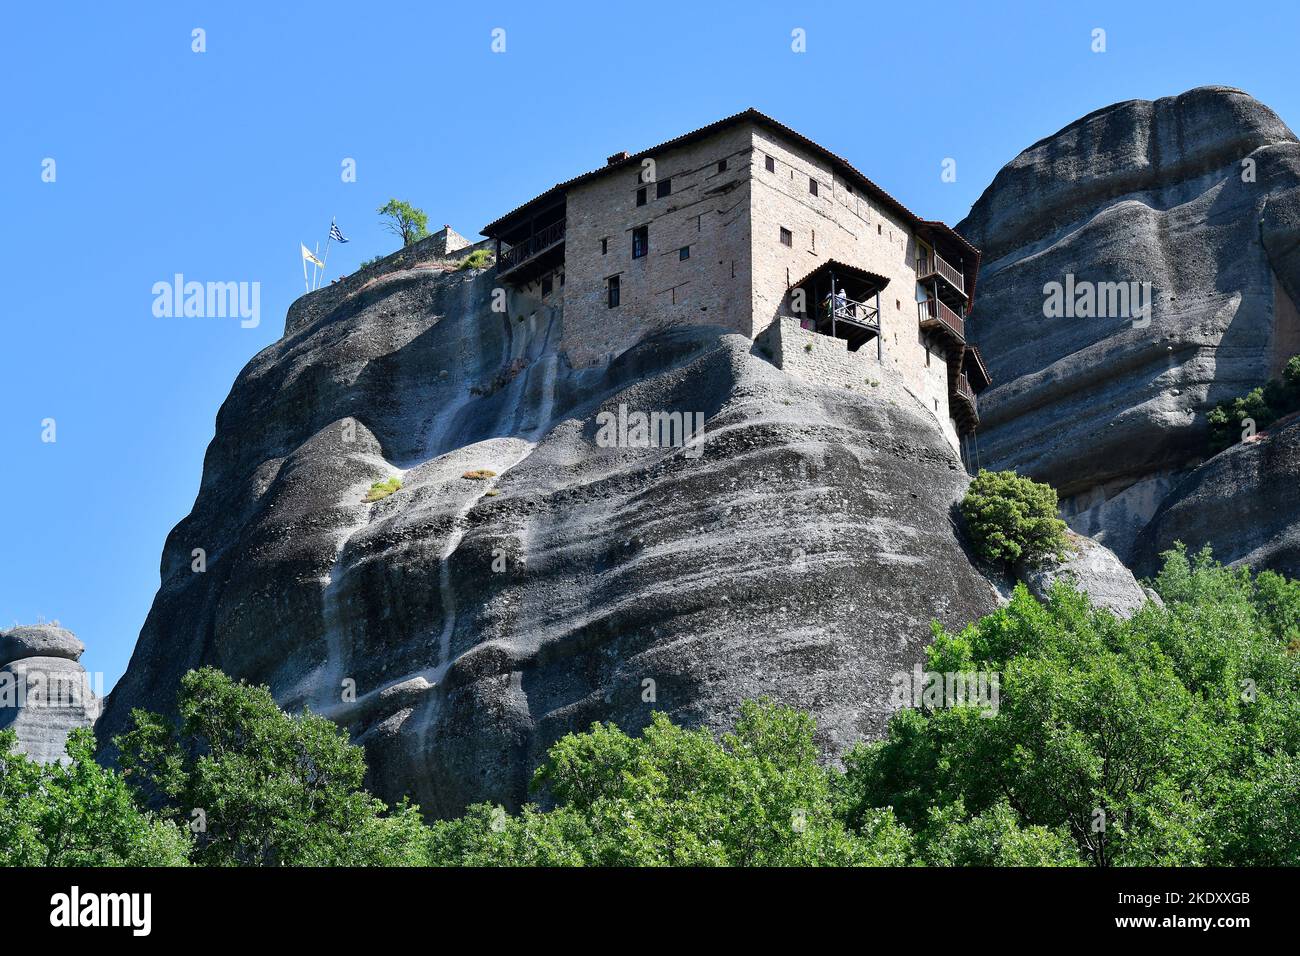 Greece, monasteries St. Nichols Anapafsas, Great Meteoron and Varlaam, a Unesco World Heritage site in Thessaly Stock Photo